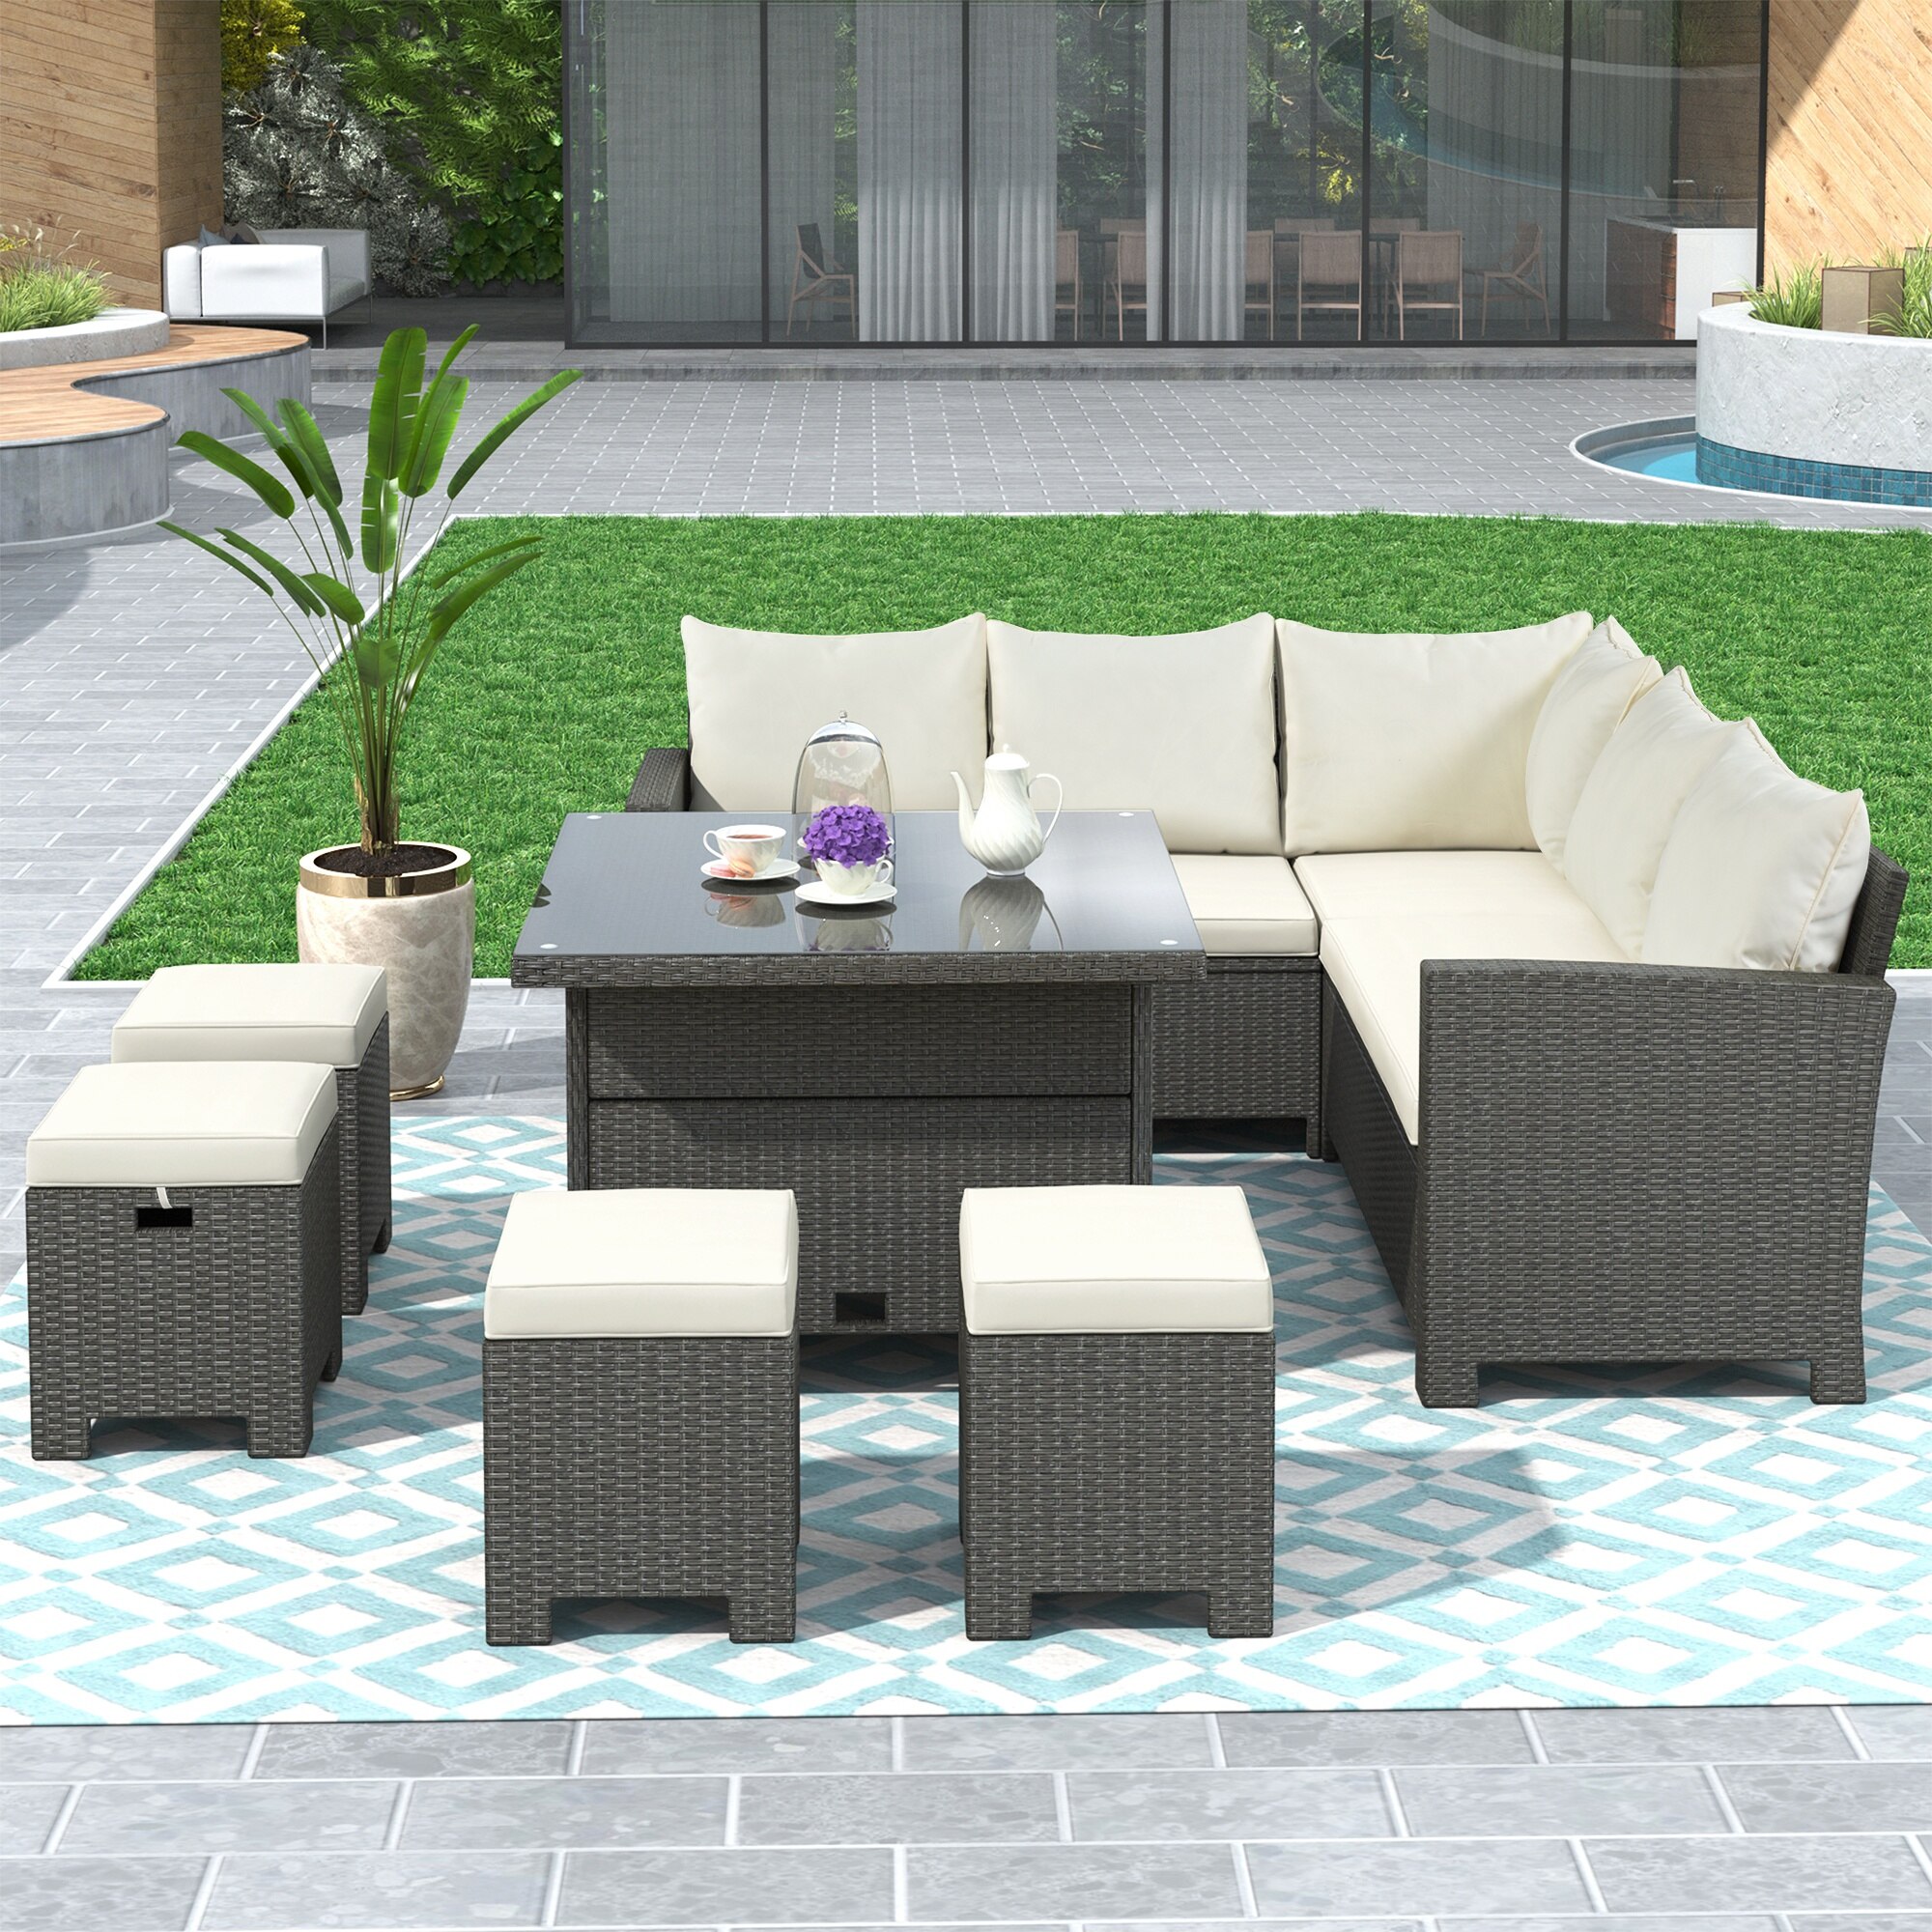 Outdoor Furniture Garden Sofas Patio Furniture Set 8 Piece Outdoor Conversation Set Dining Table Chair With Ottoman Cushions 2